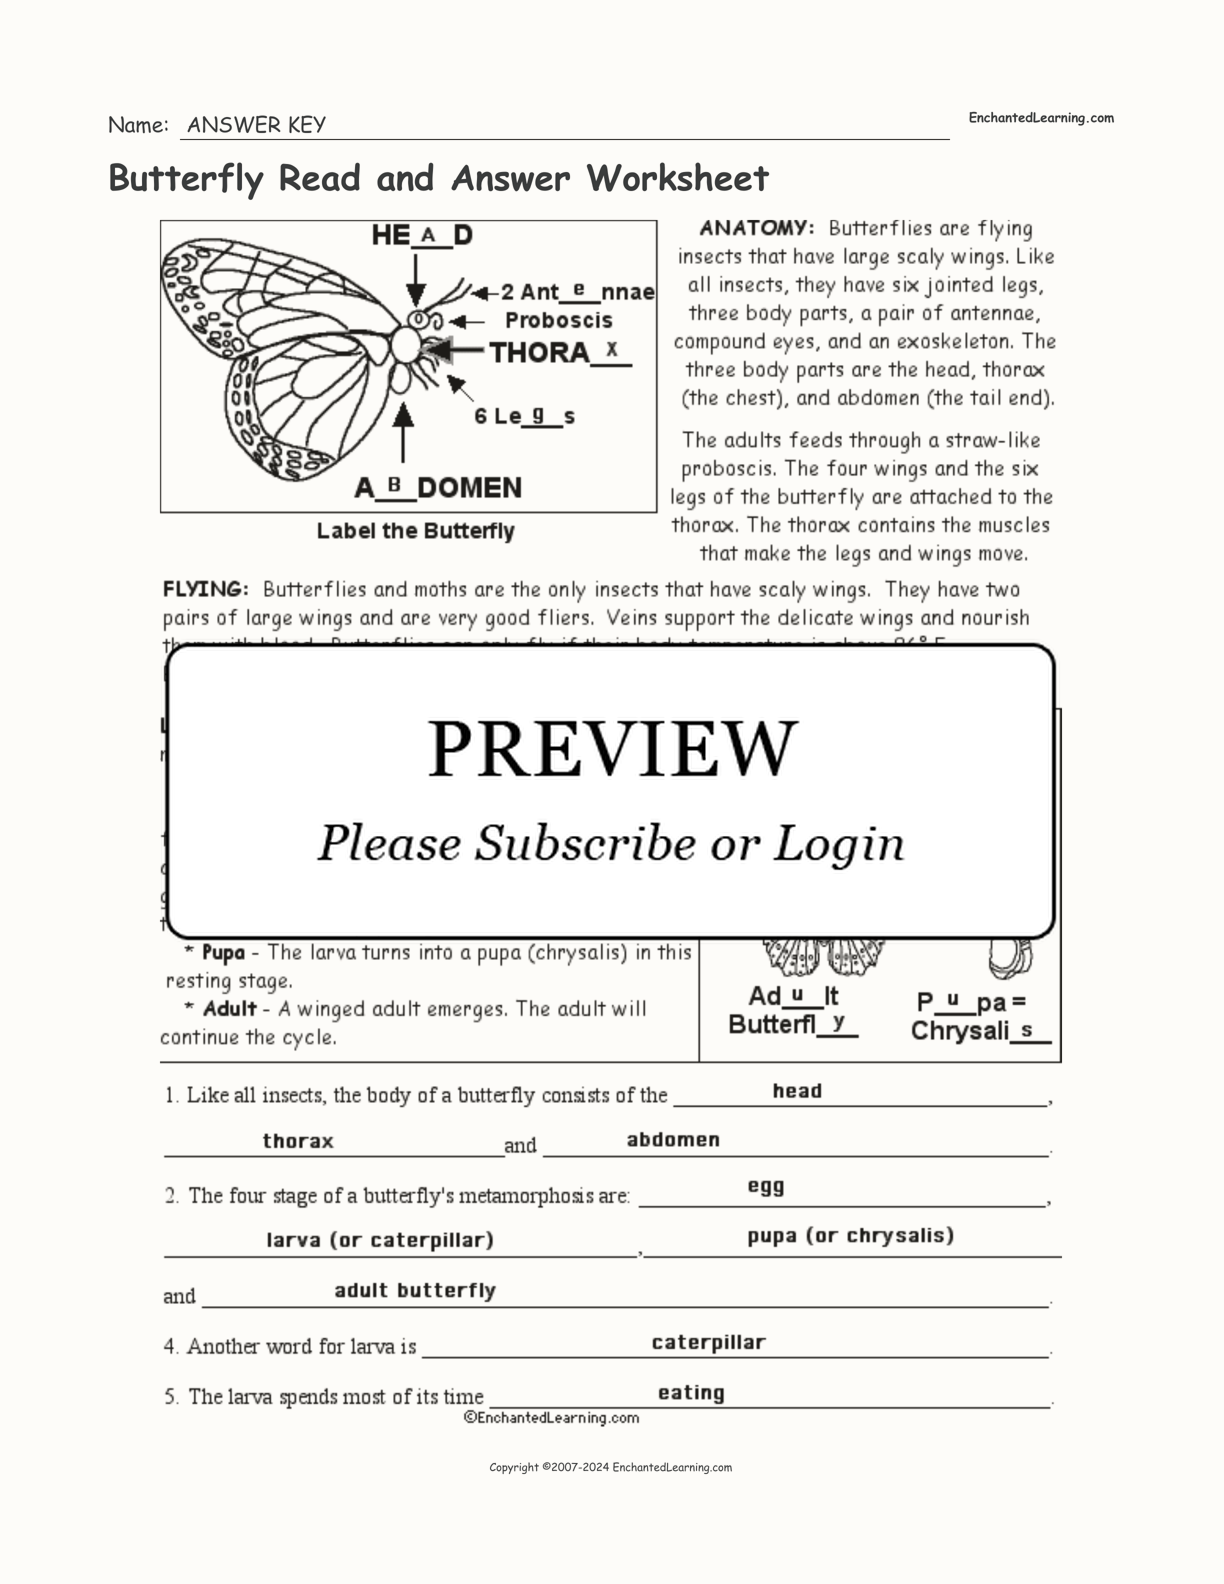 Butterfly Read and Answer Worksheet interactive worksheet page 2